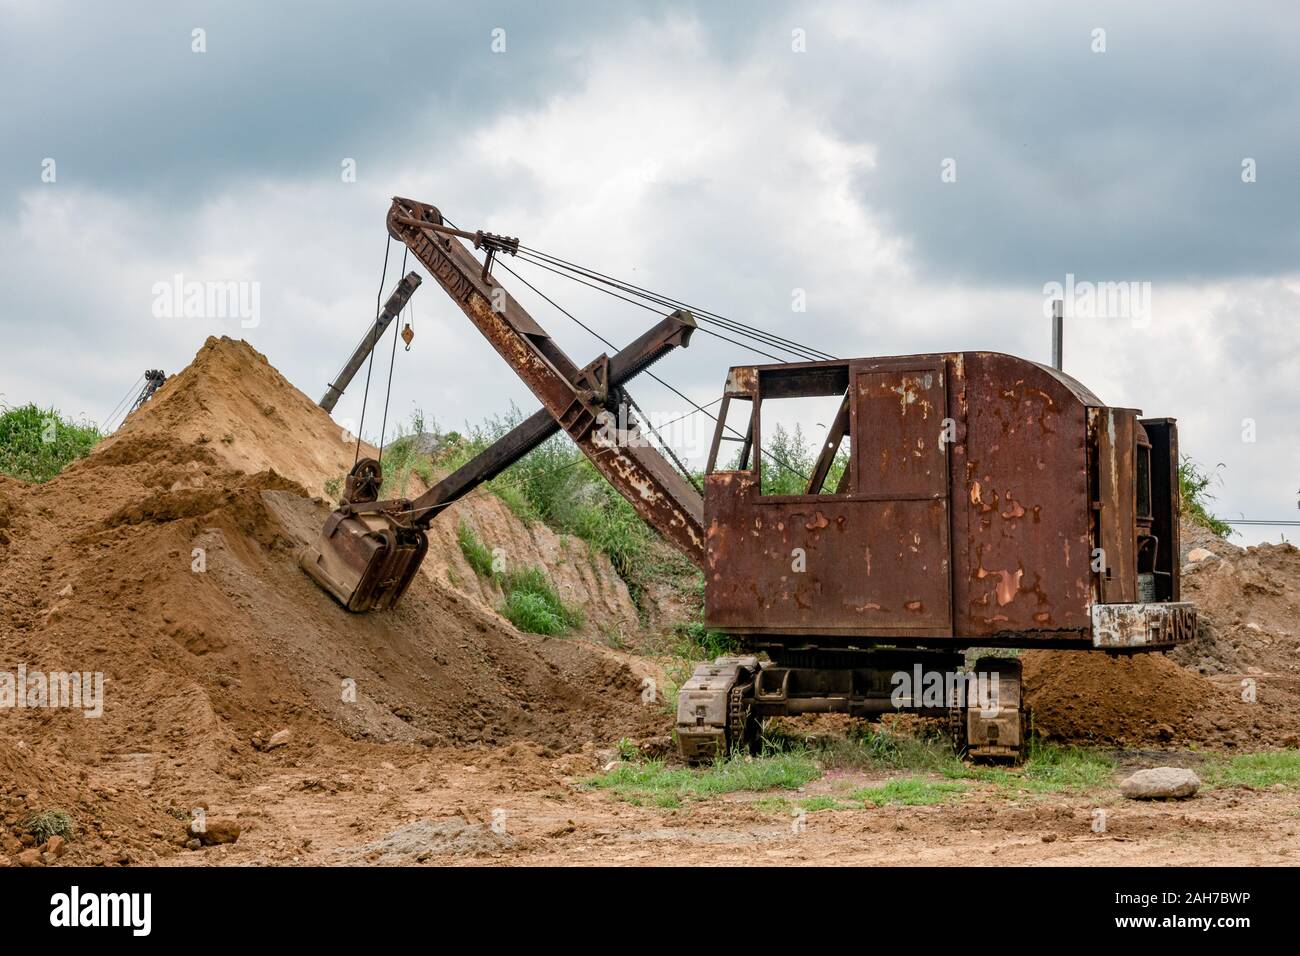 Digging machine and excavators at the Rough and Tumble Thresherman's Renuion in Kinzers. Stock Photo